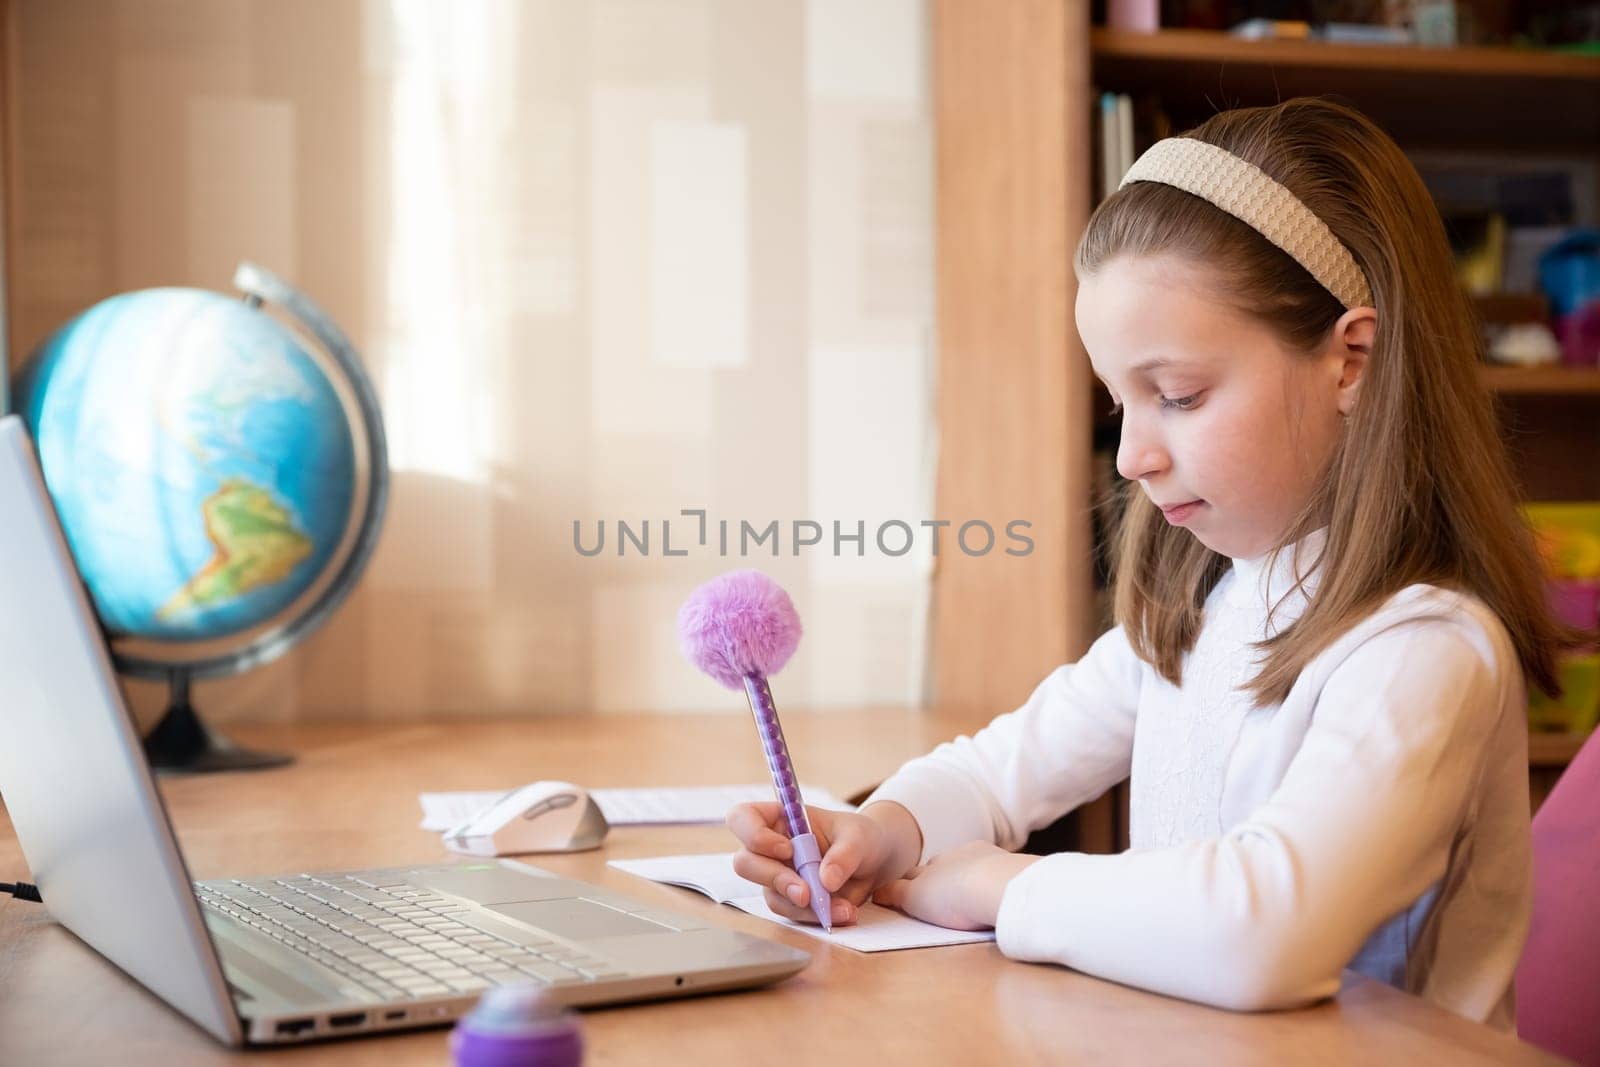 Online education of children. Girl schoolgirl teaches a lesson online using a laptop video chat call conference with a teacher at home.